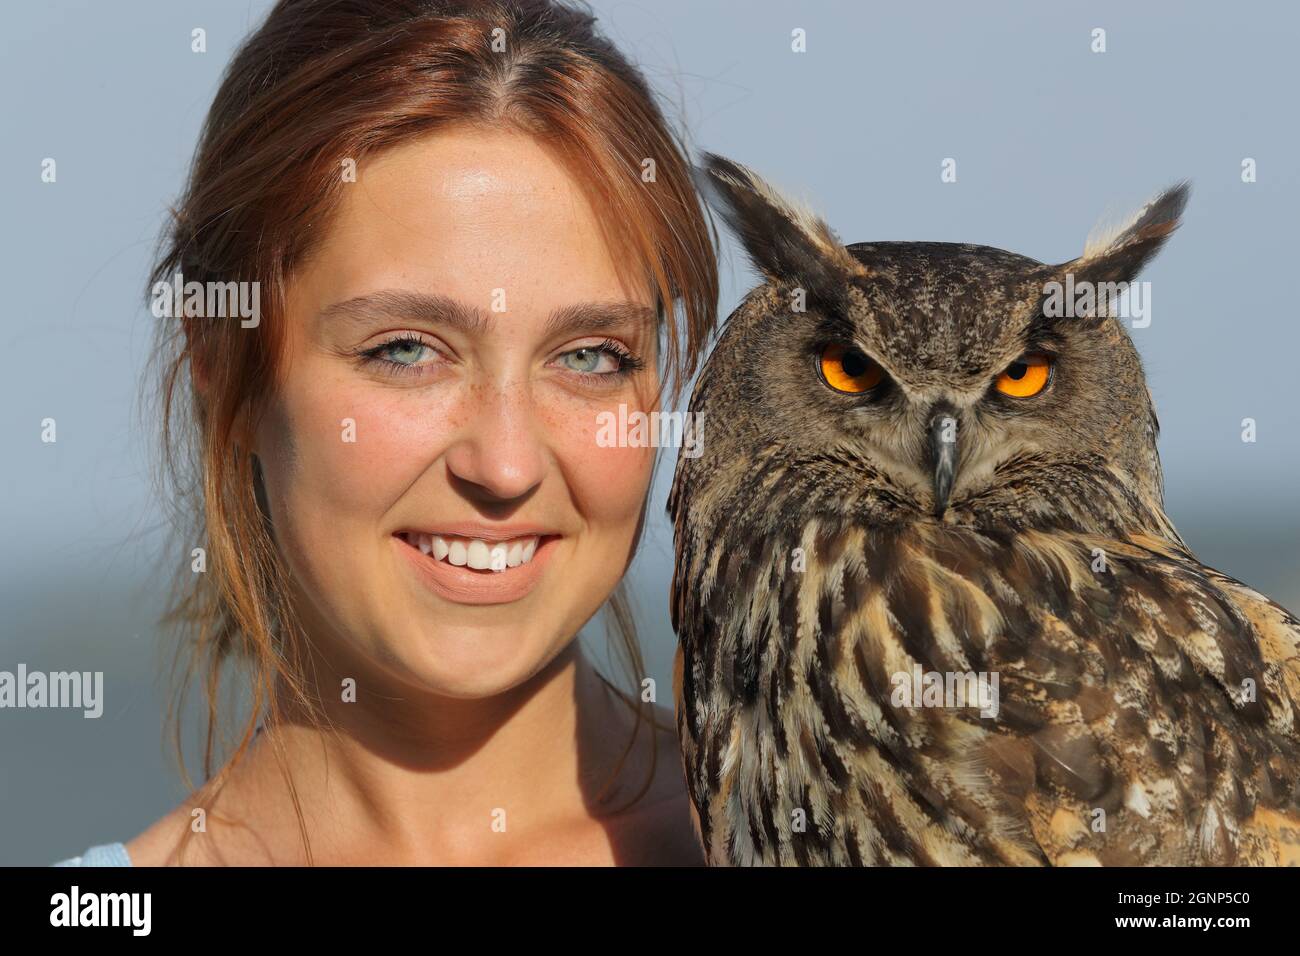 Portrait of a happy woman holding royal owl looking at camera Stock Photo